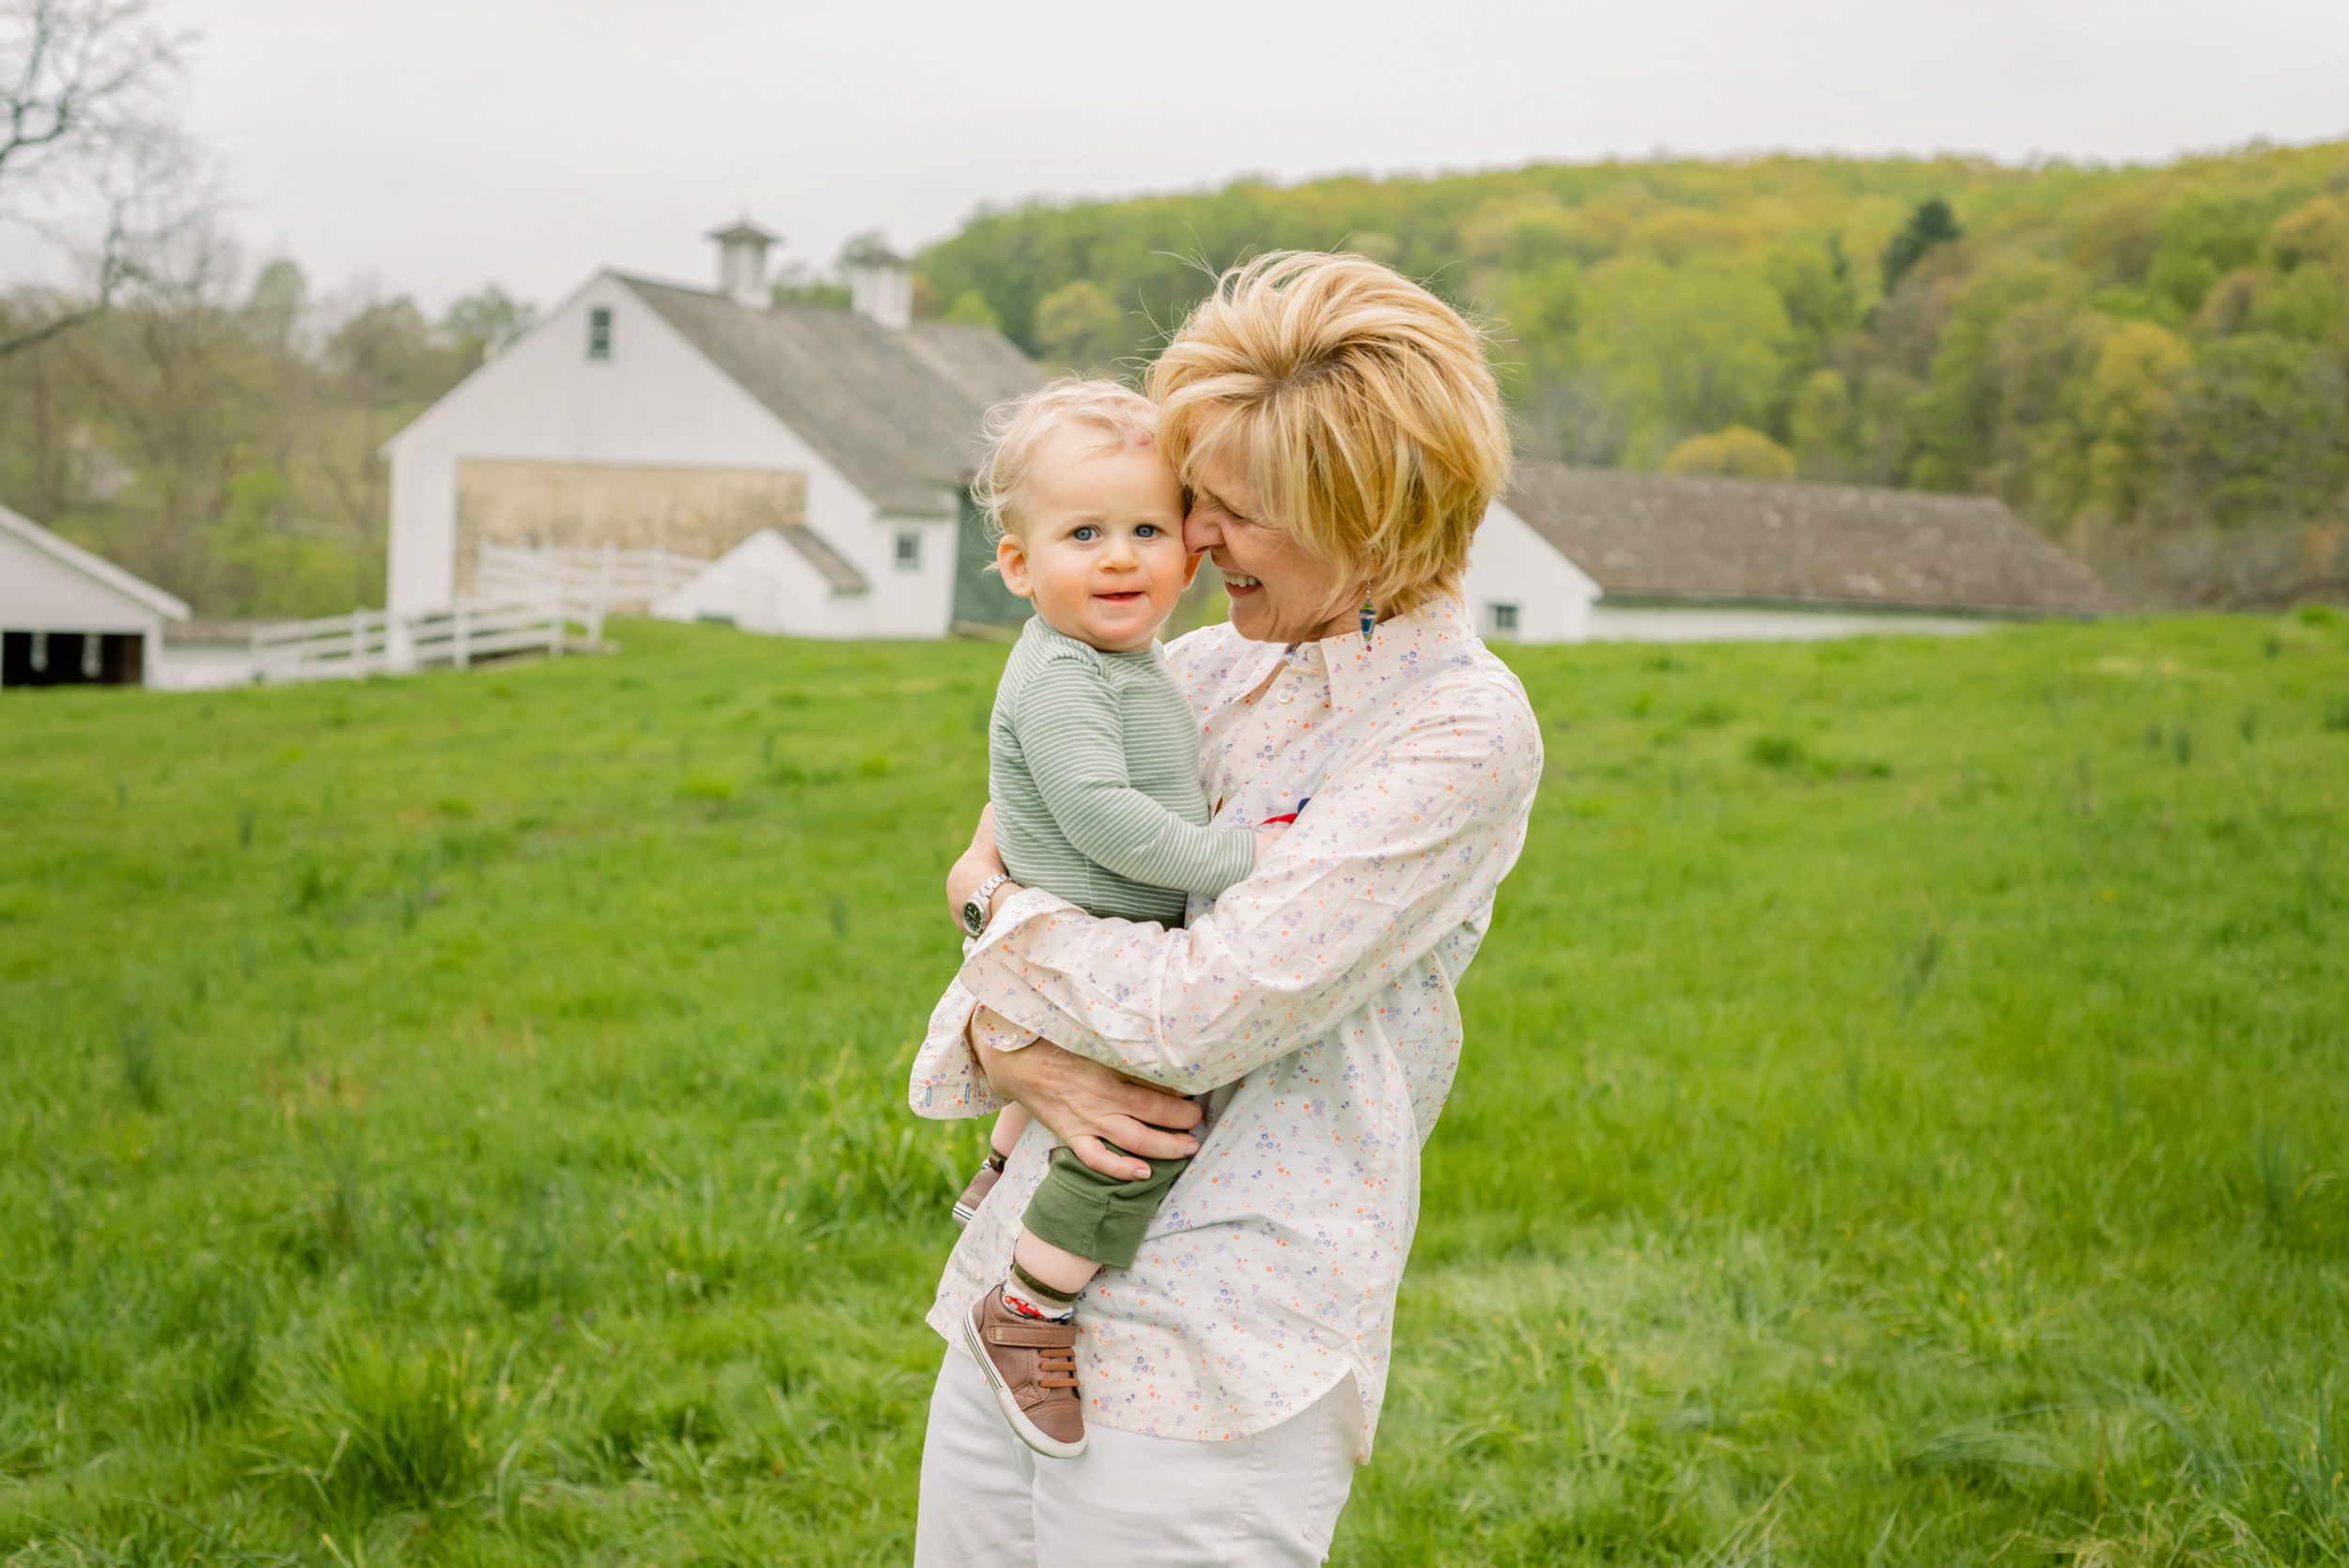 A grandmother snuggling her grandson with white and green barns in the background during an extended family photo session